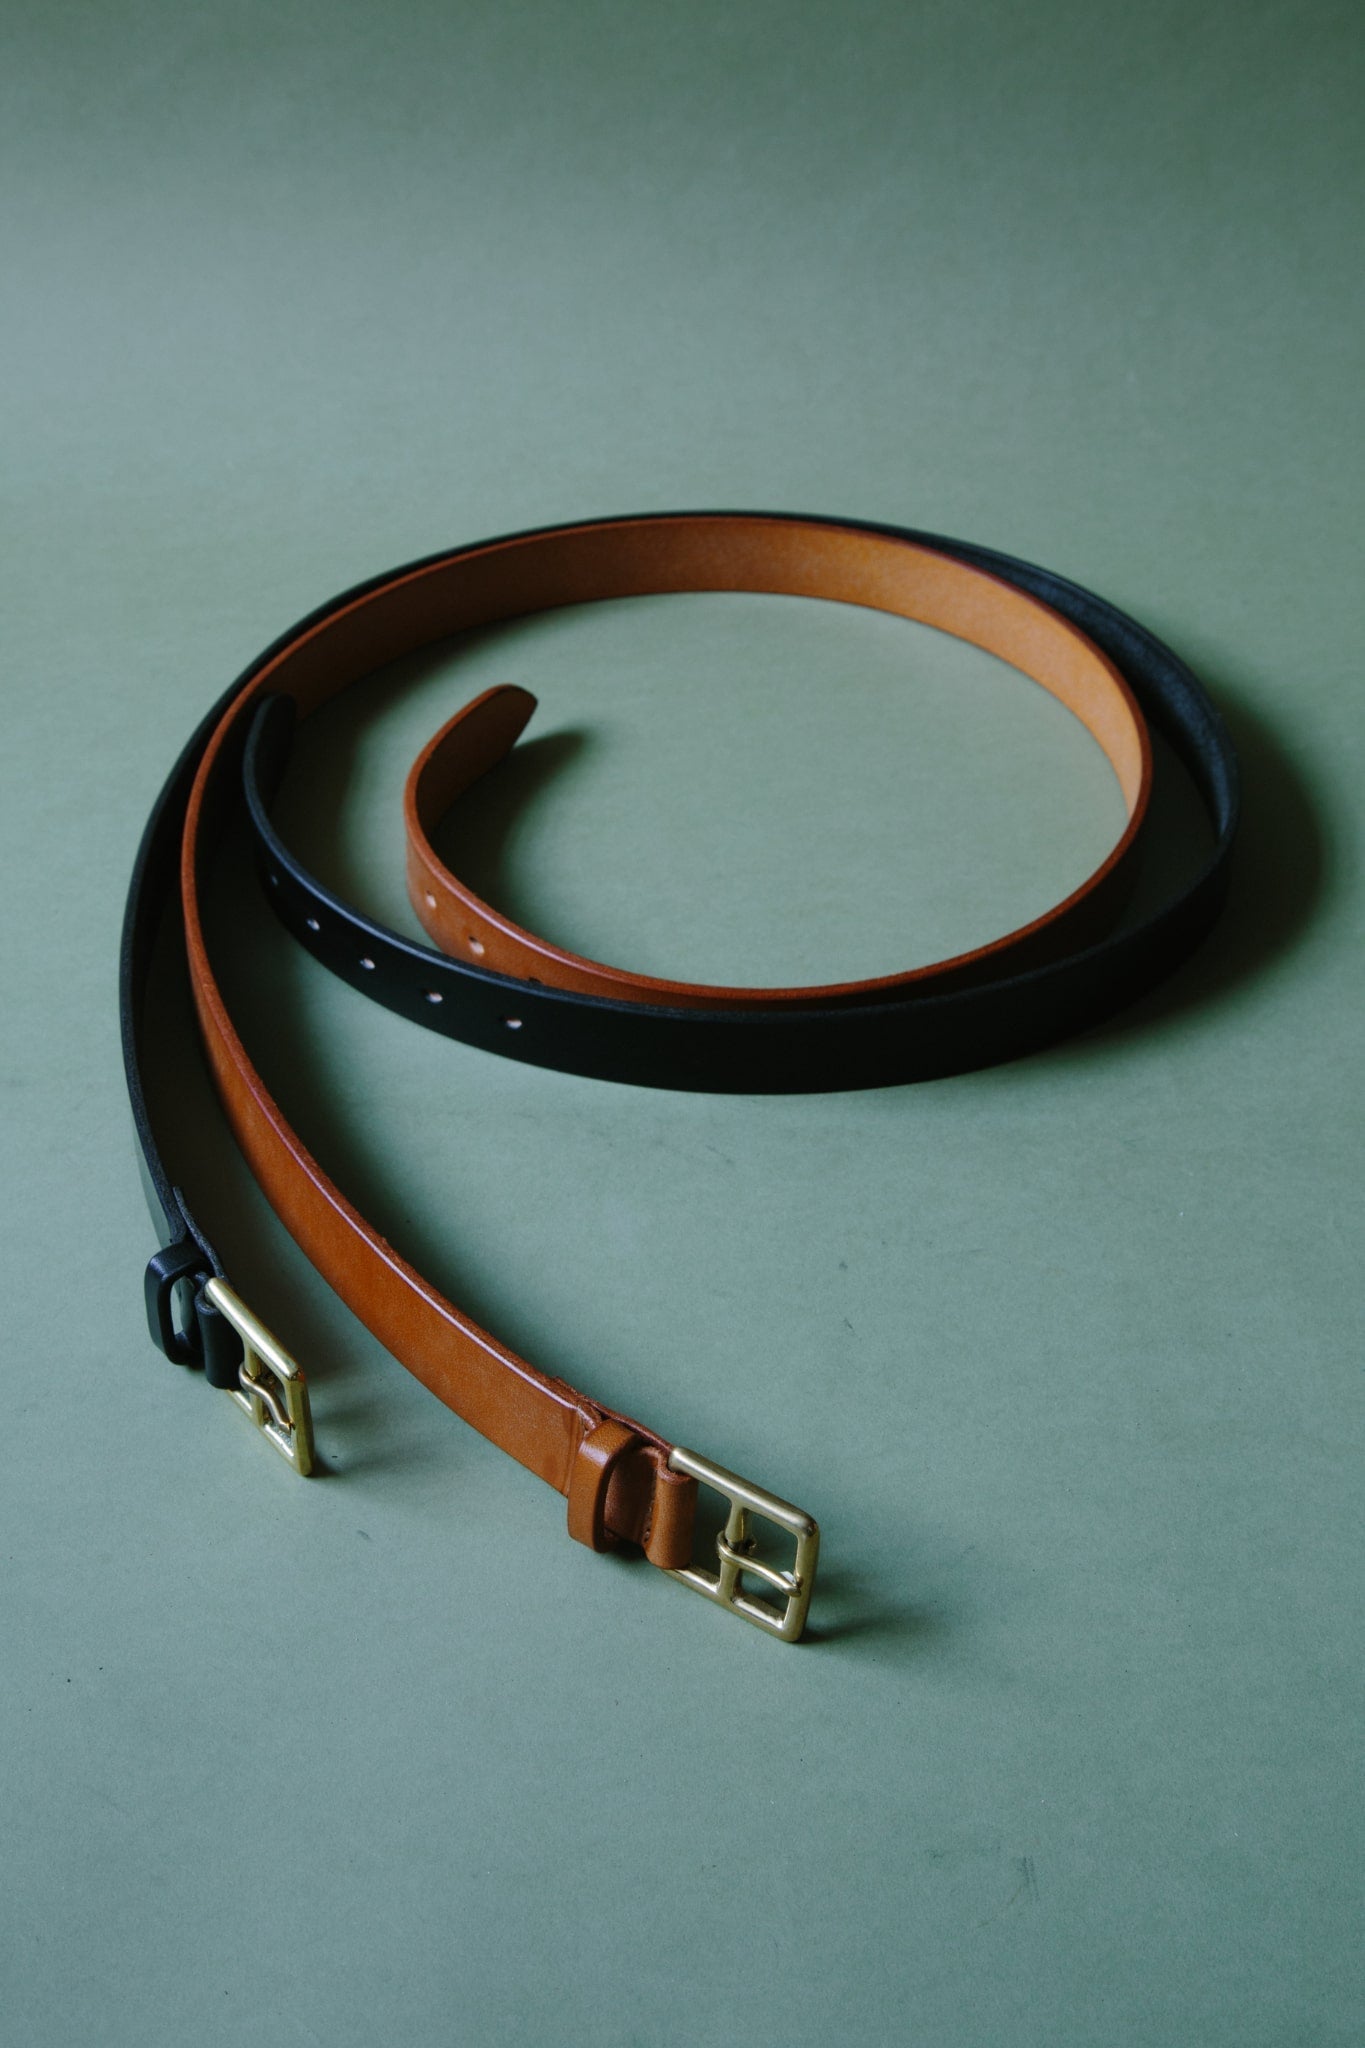 Two McRosite bridle leather belts, wrapped into circles, one tan and one black with metal buckles. Shot on a green background.